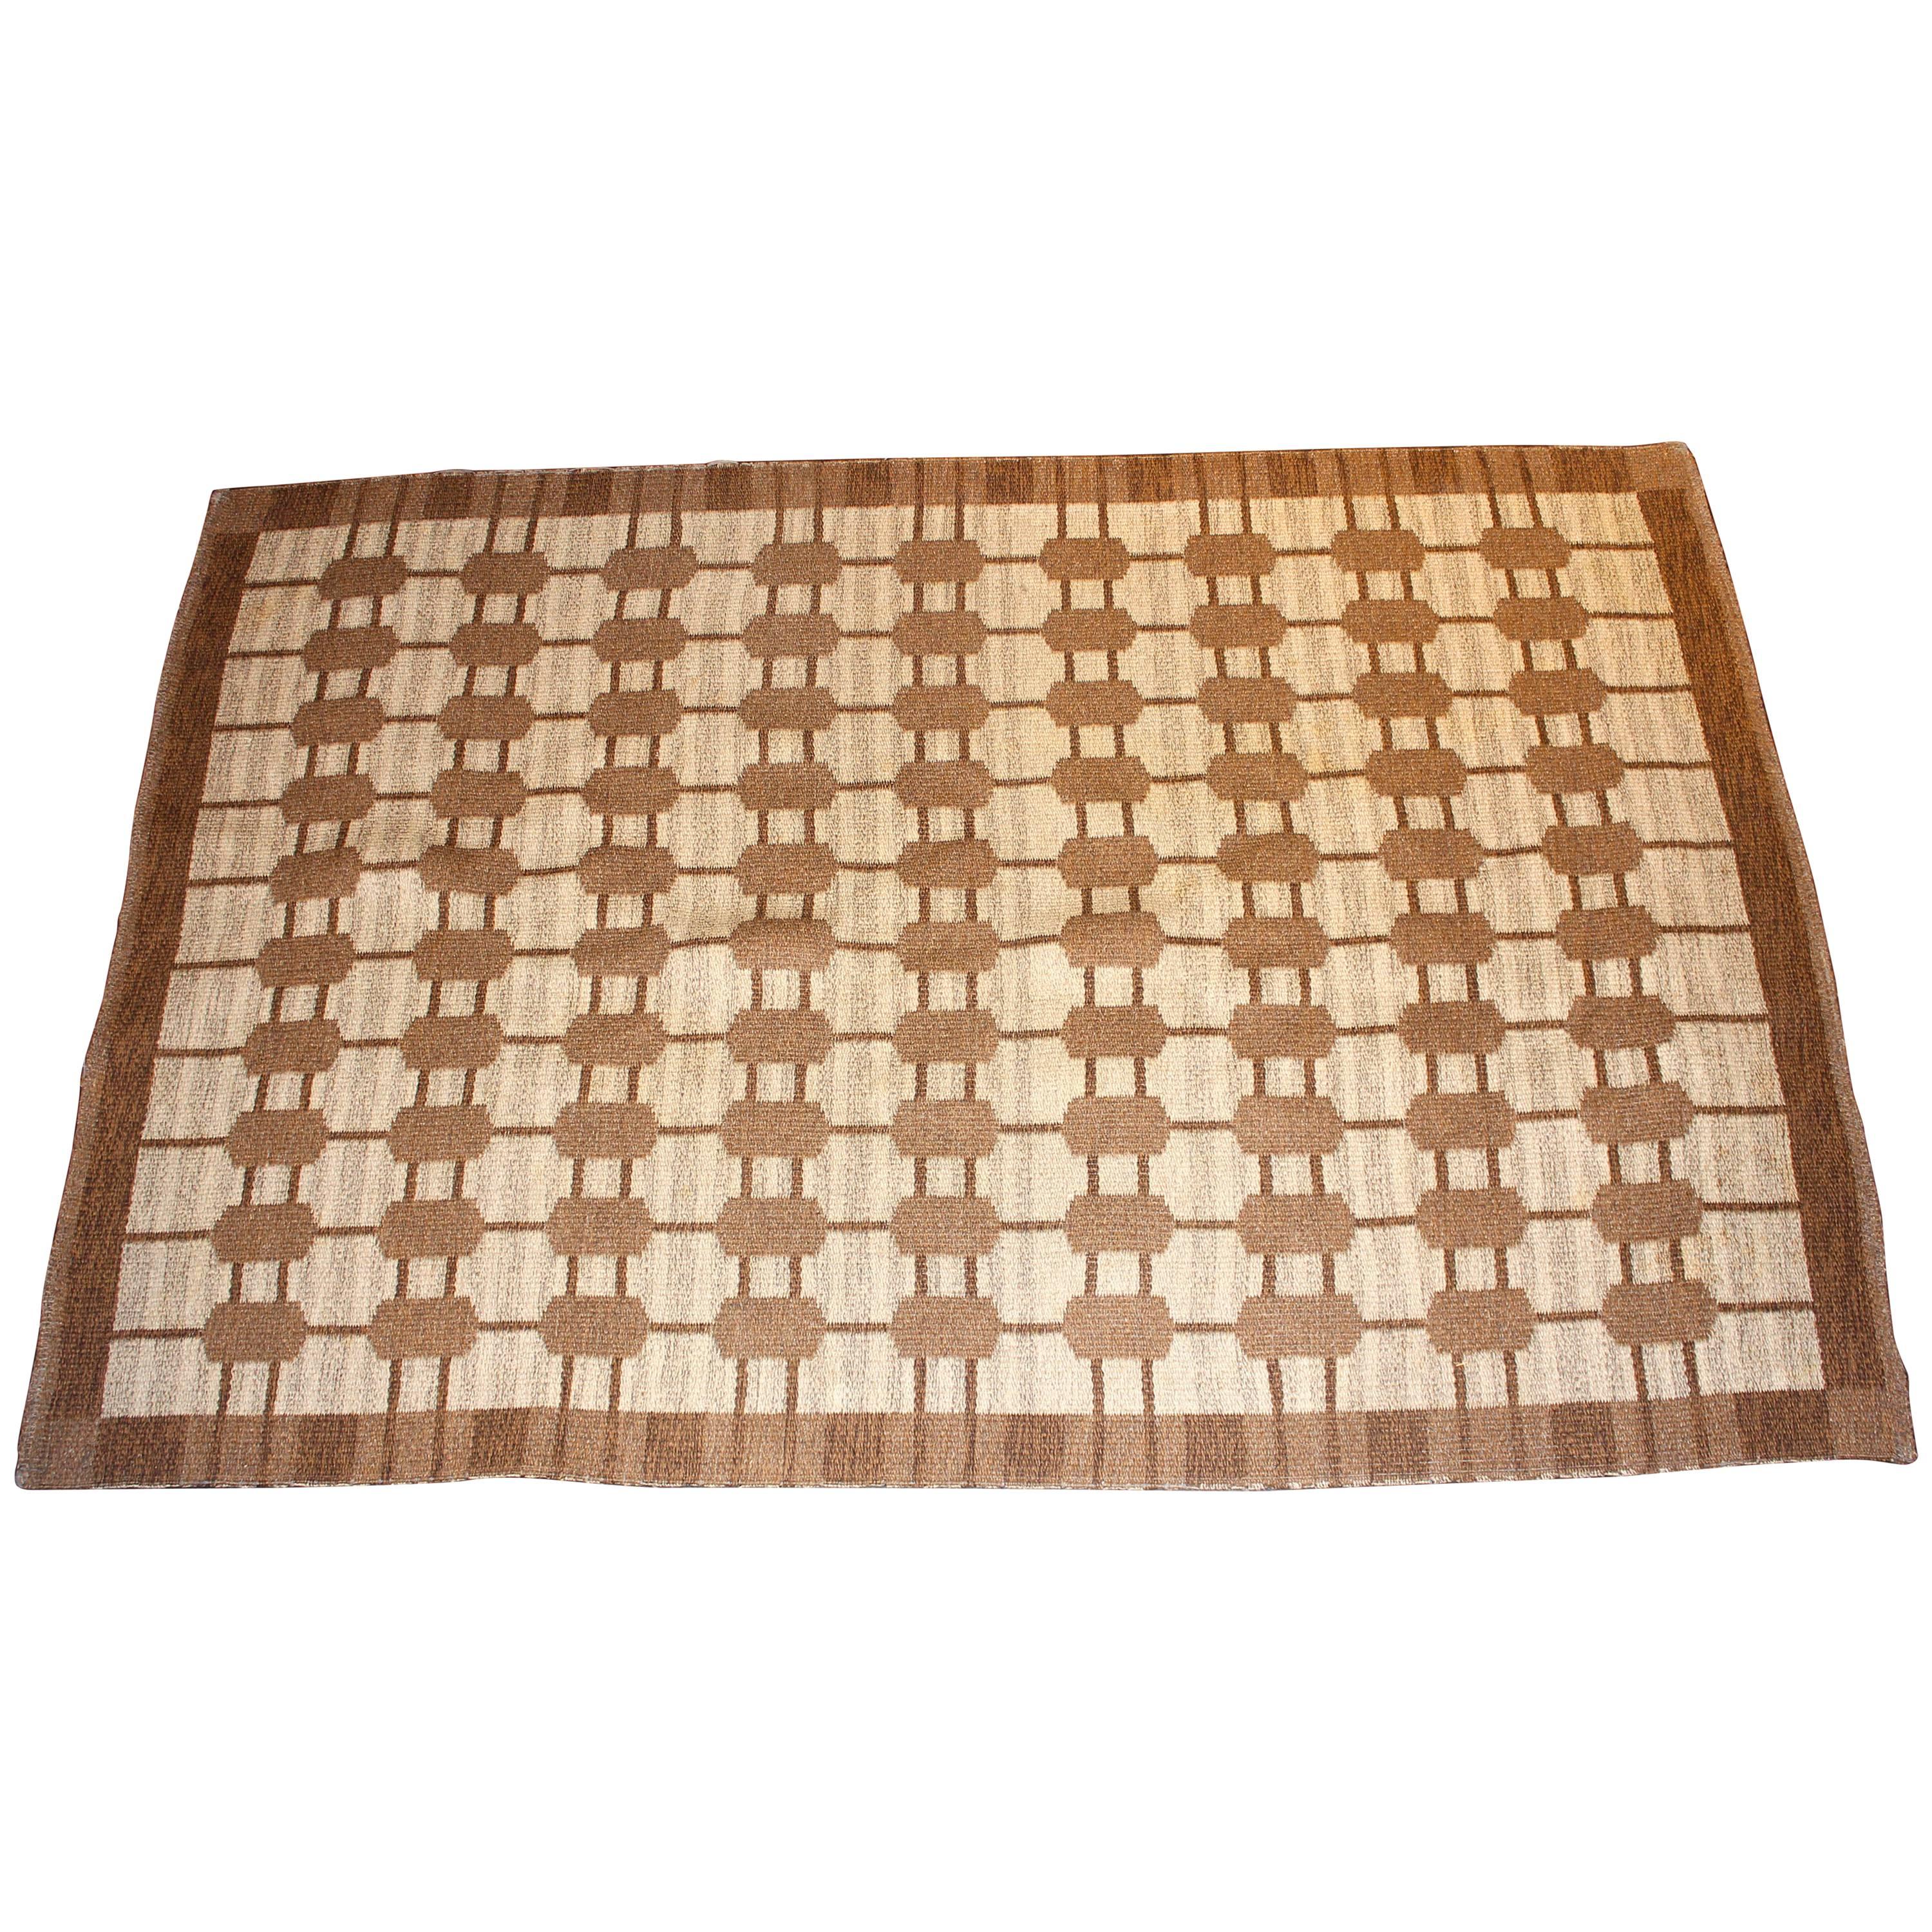 Midcentury Swedish Two-Sided Flat-Weave Carpet with Geometrical Patterns